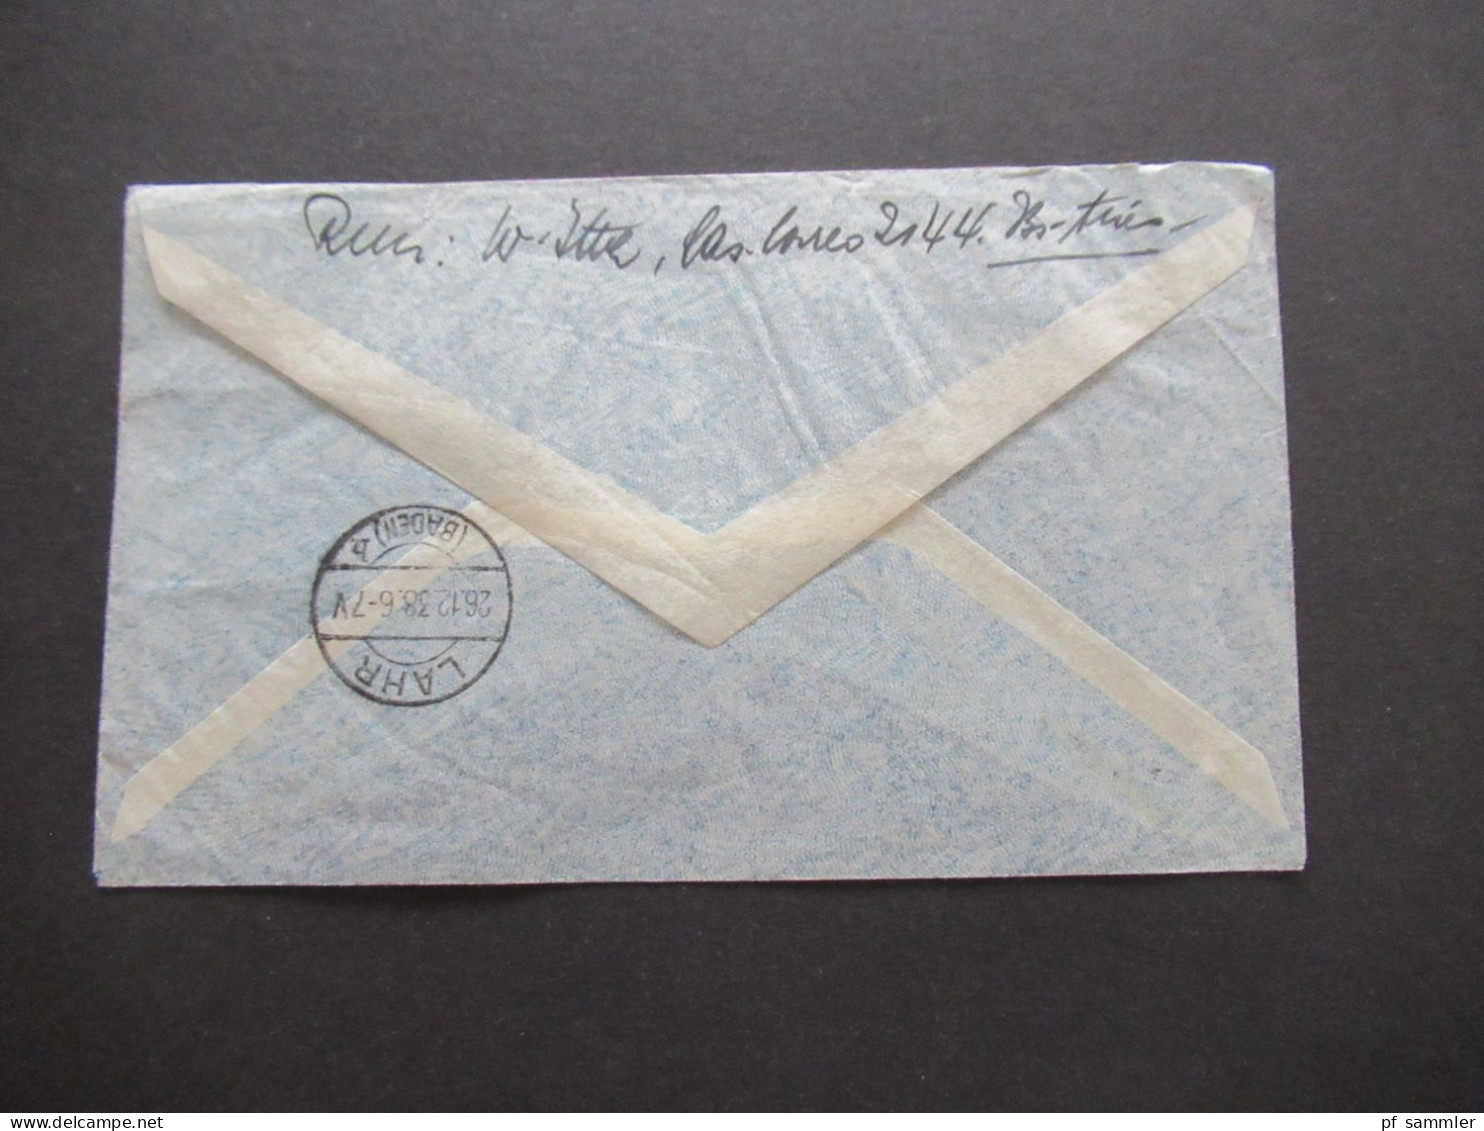 Argentinien 1938 Luftpost / Air Mail Via Condor / Buenos Aires - Lahr Schwarzwald / Certificado Registered Letter - Covers & Documents